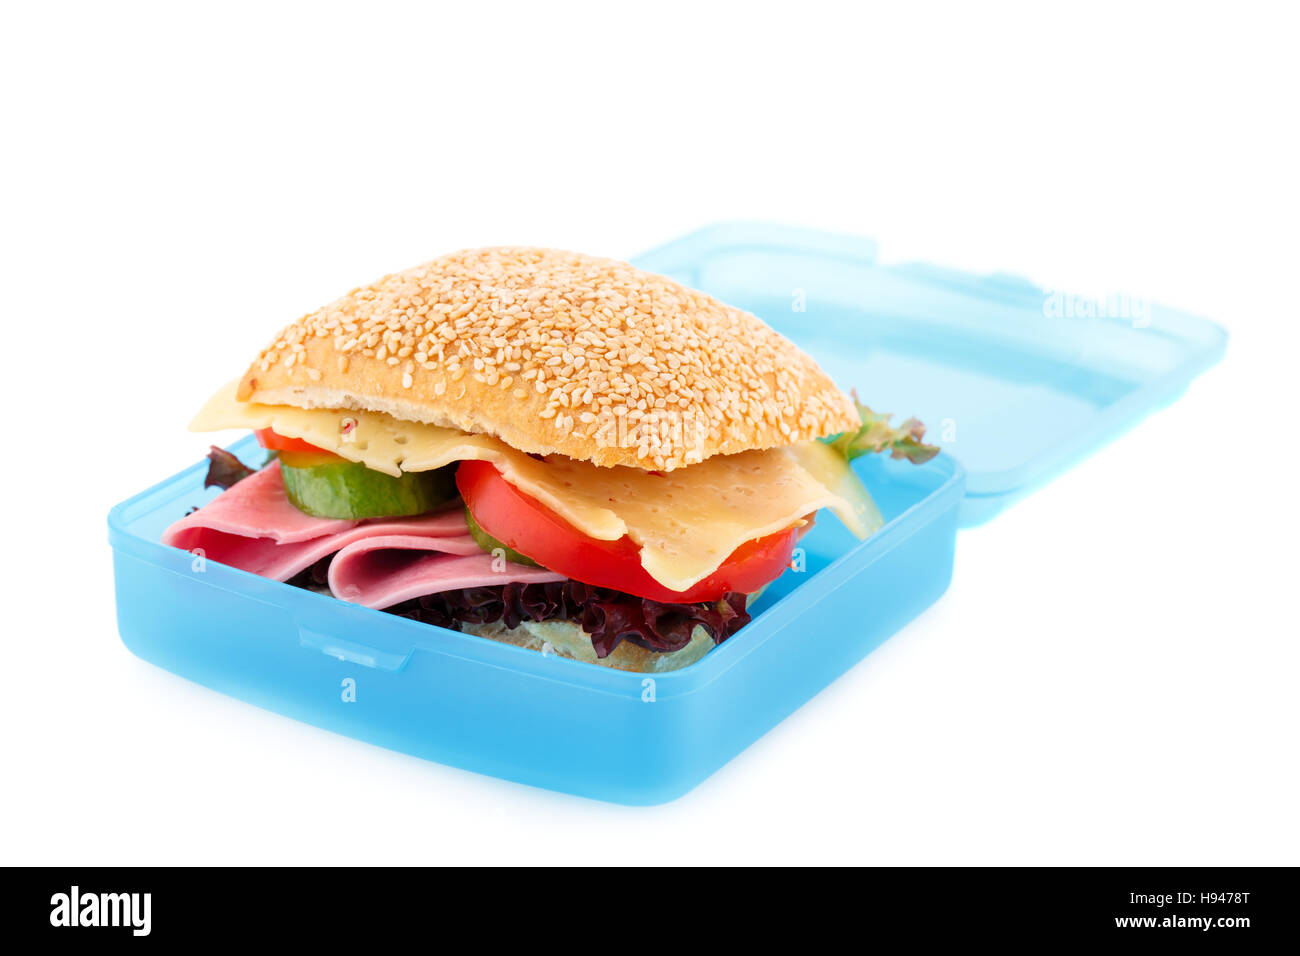 https://c8.alamy.com/comp/H9478T/sandwich-with-fresh-vegetables-ham-and-cheese-in-plastic-container-H9478T.jpg